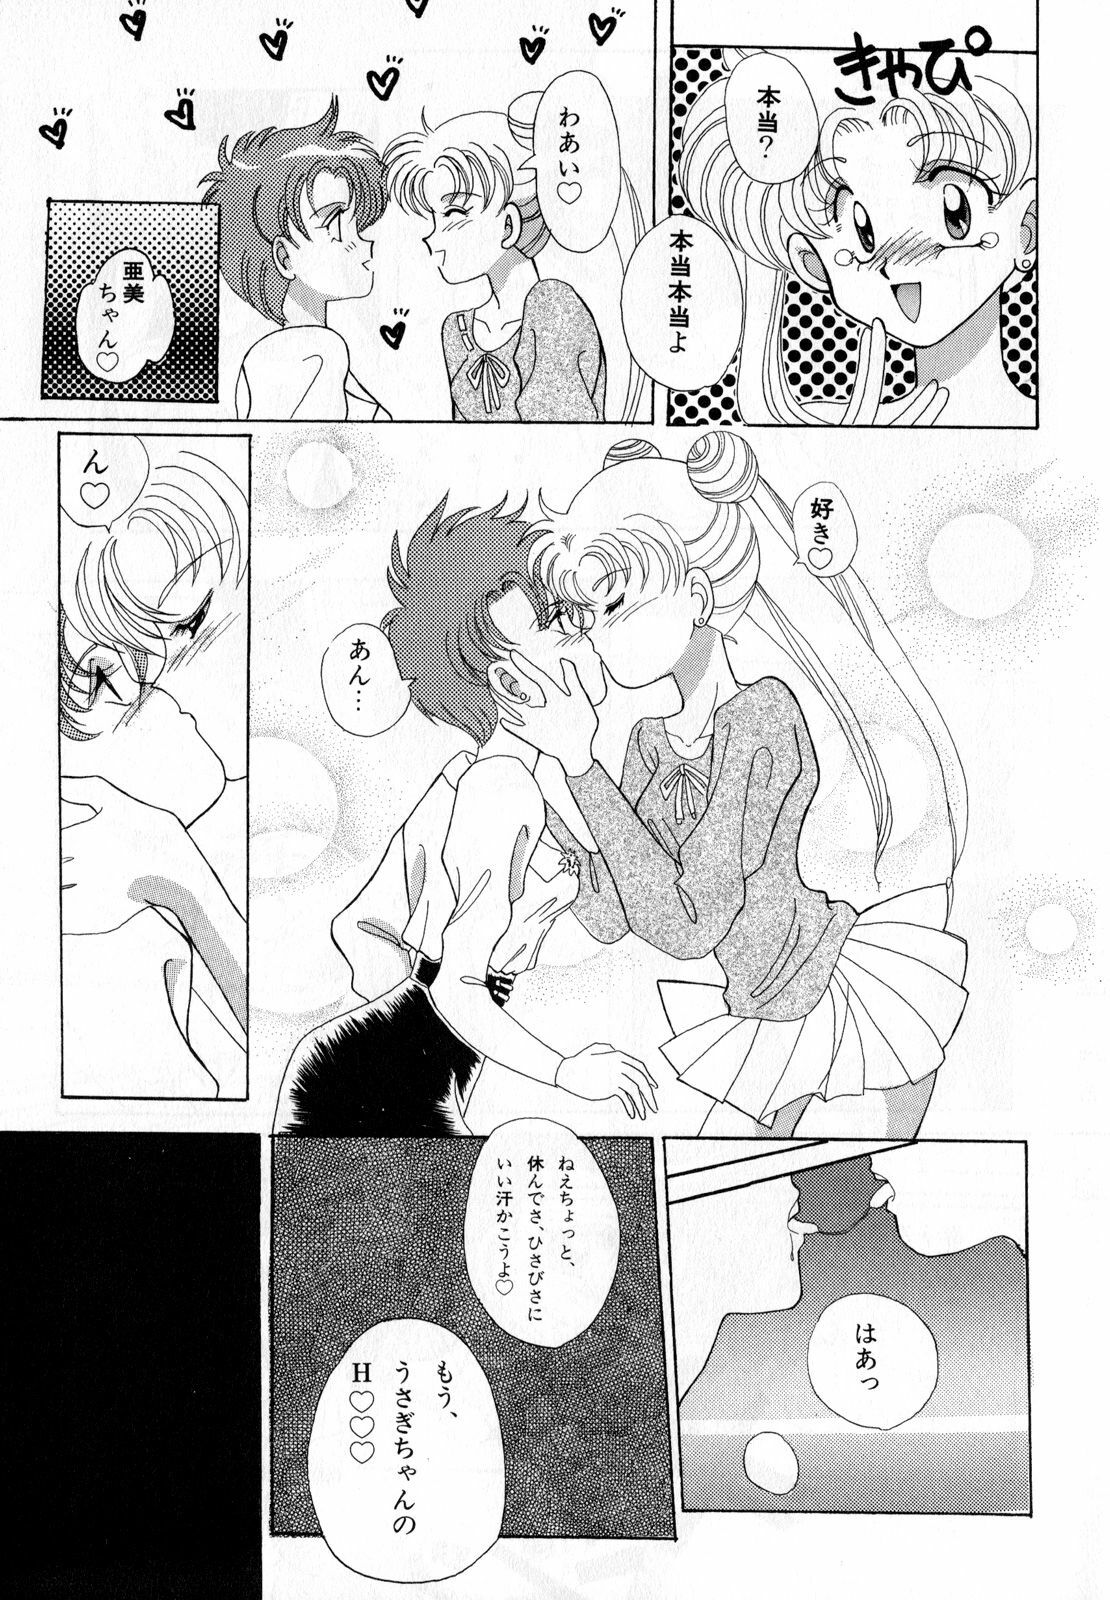 [Anthology] Lunatic Party 3 (Sailor Moon) page 34 full